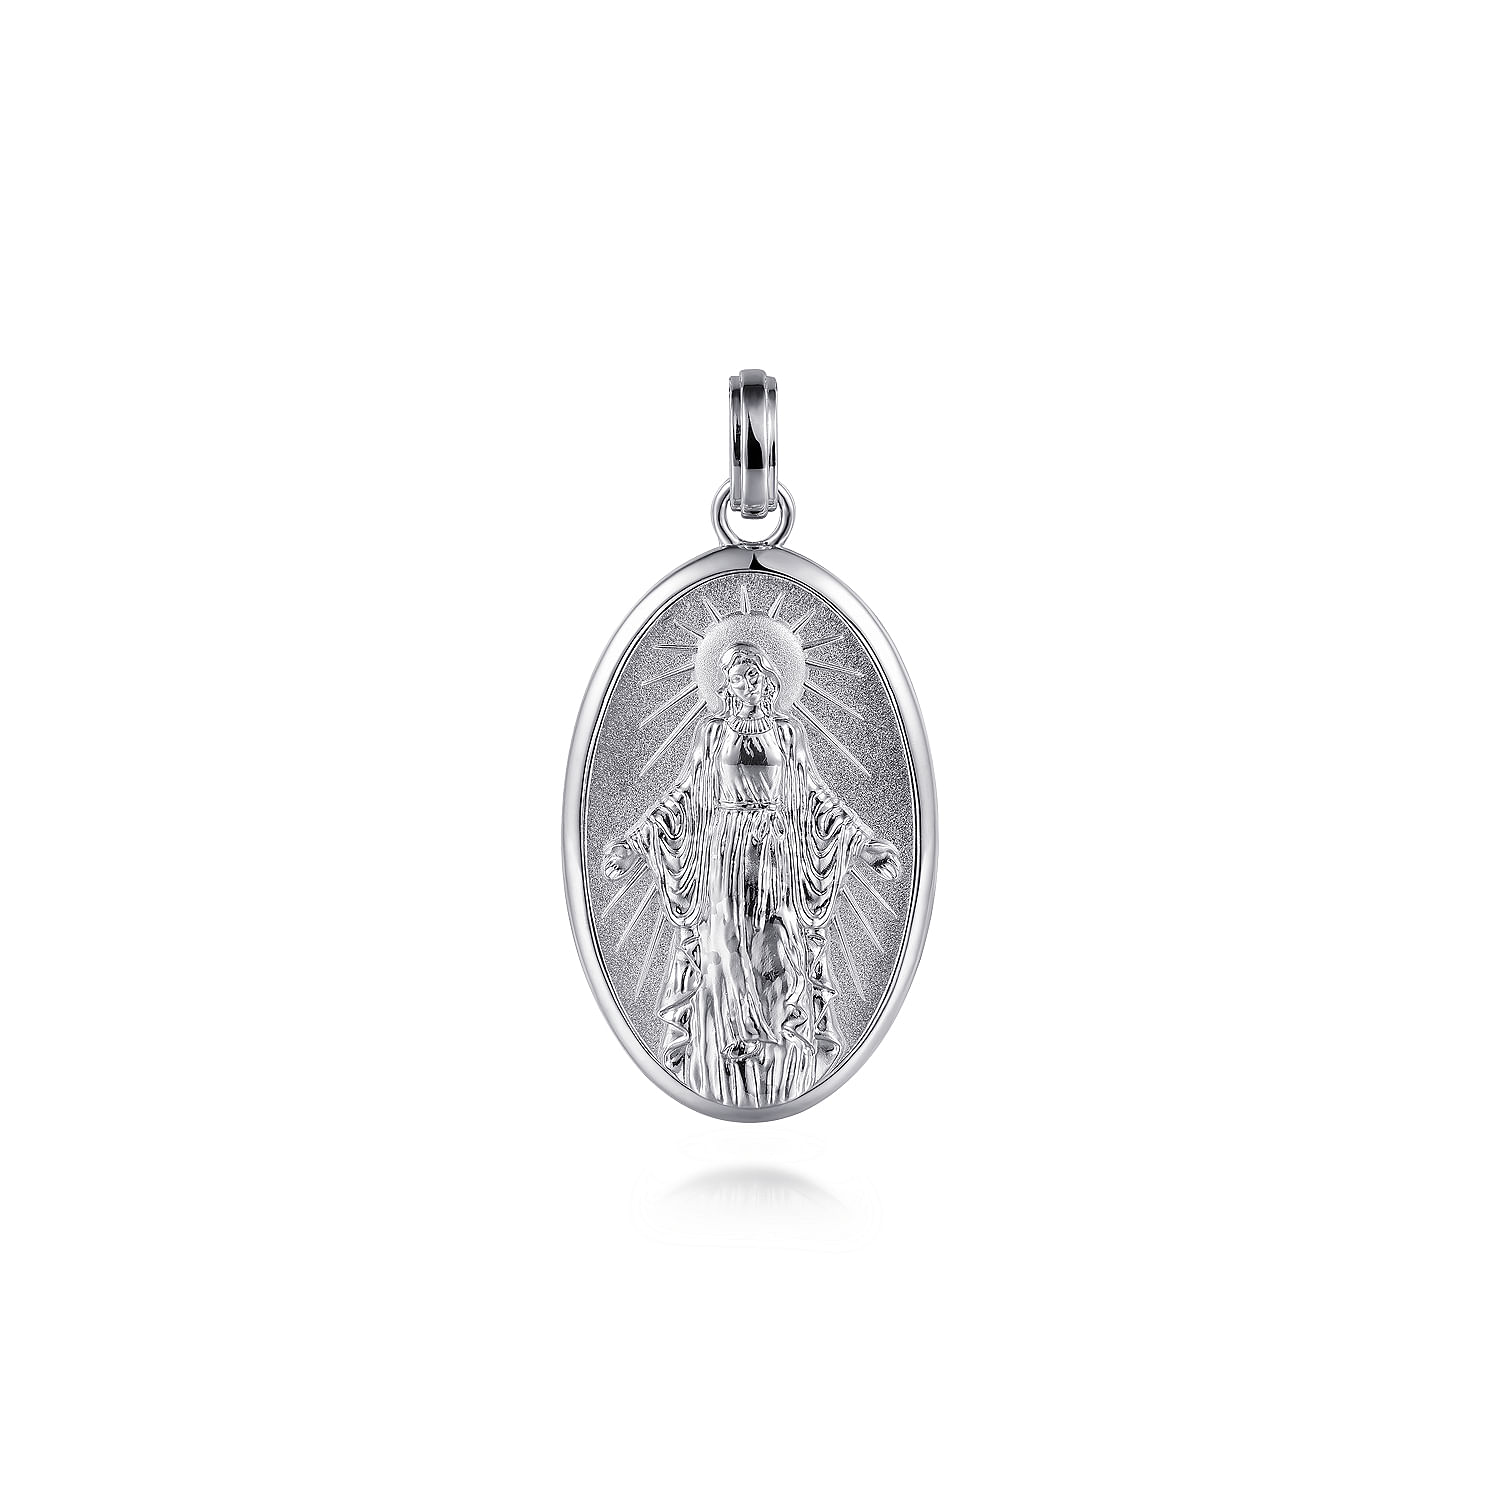 Oval 925 Sterling Silver Virgin Mary Pendant